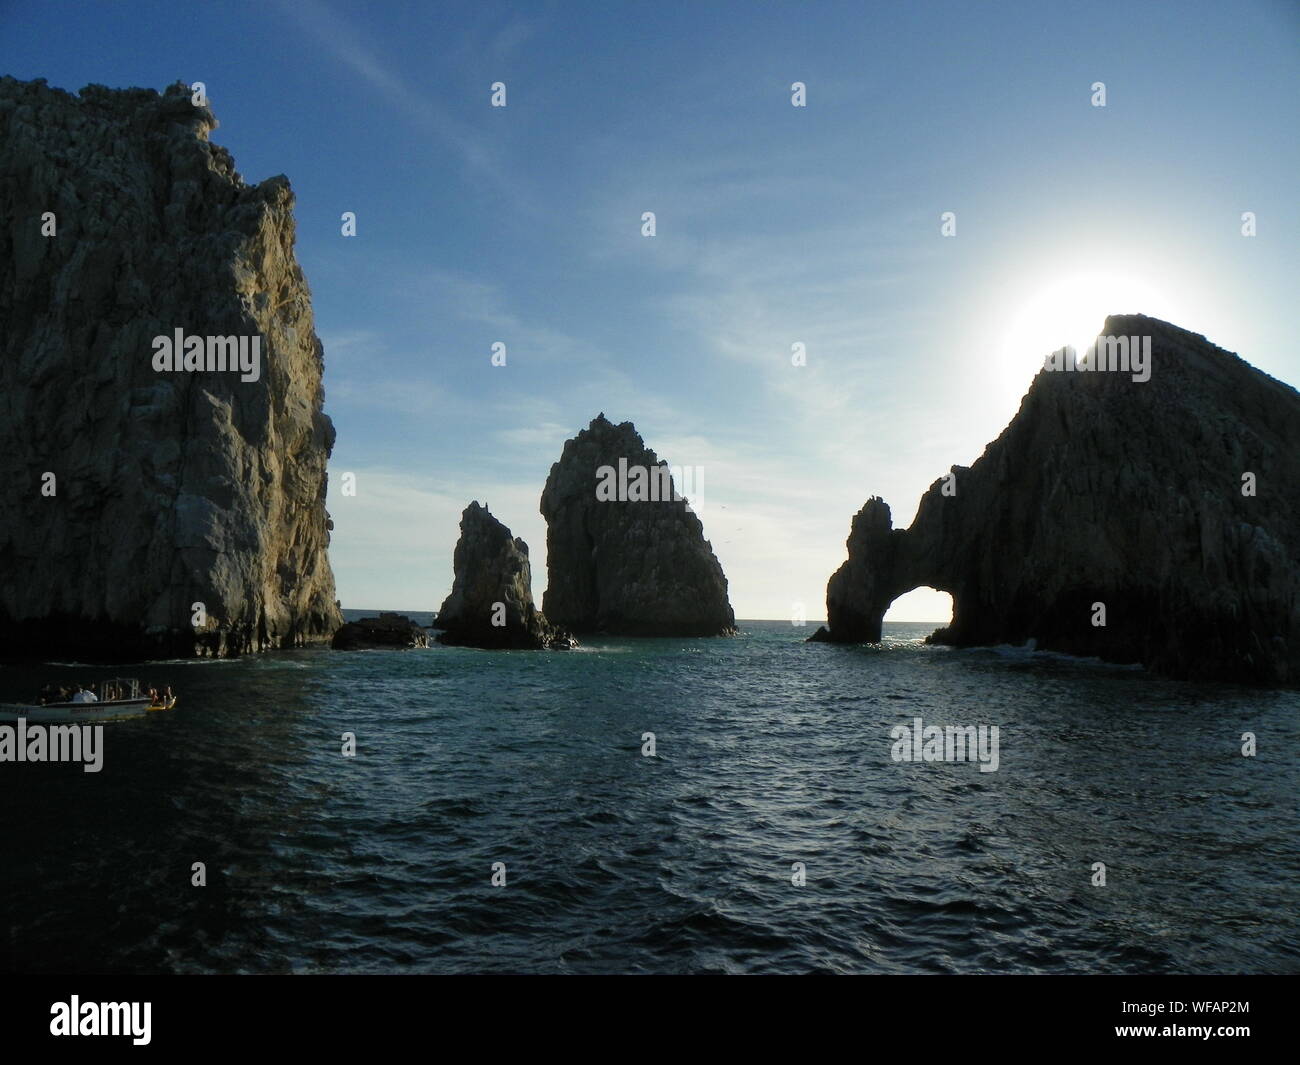 Arch Of Cabo San Lucas And Rock Formation In Sea Against Sky Stock Photo